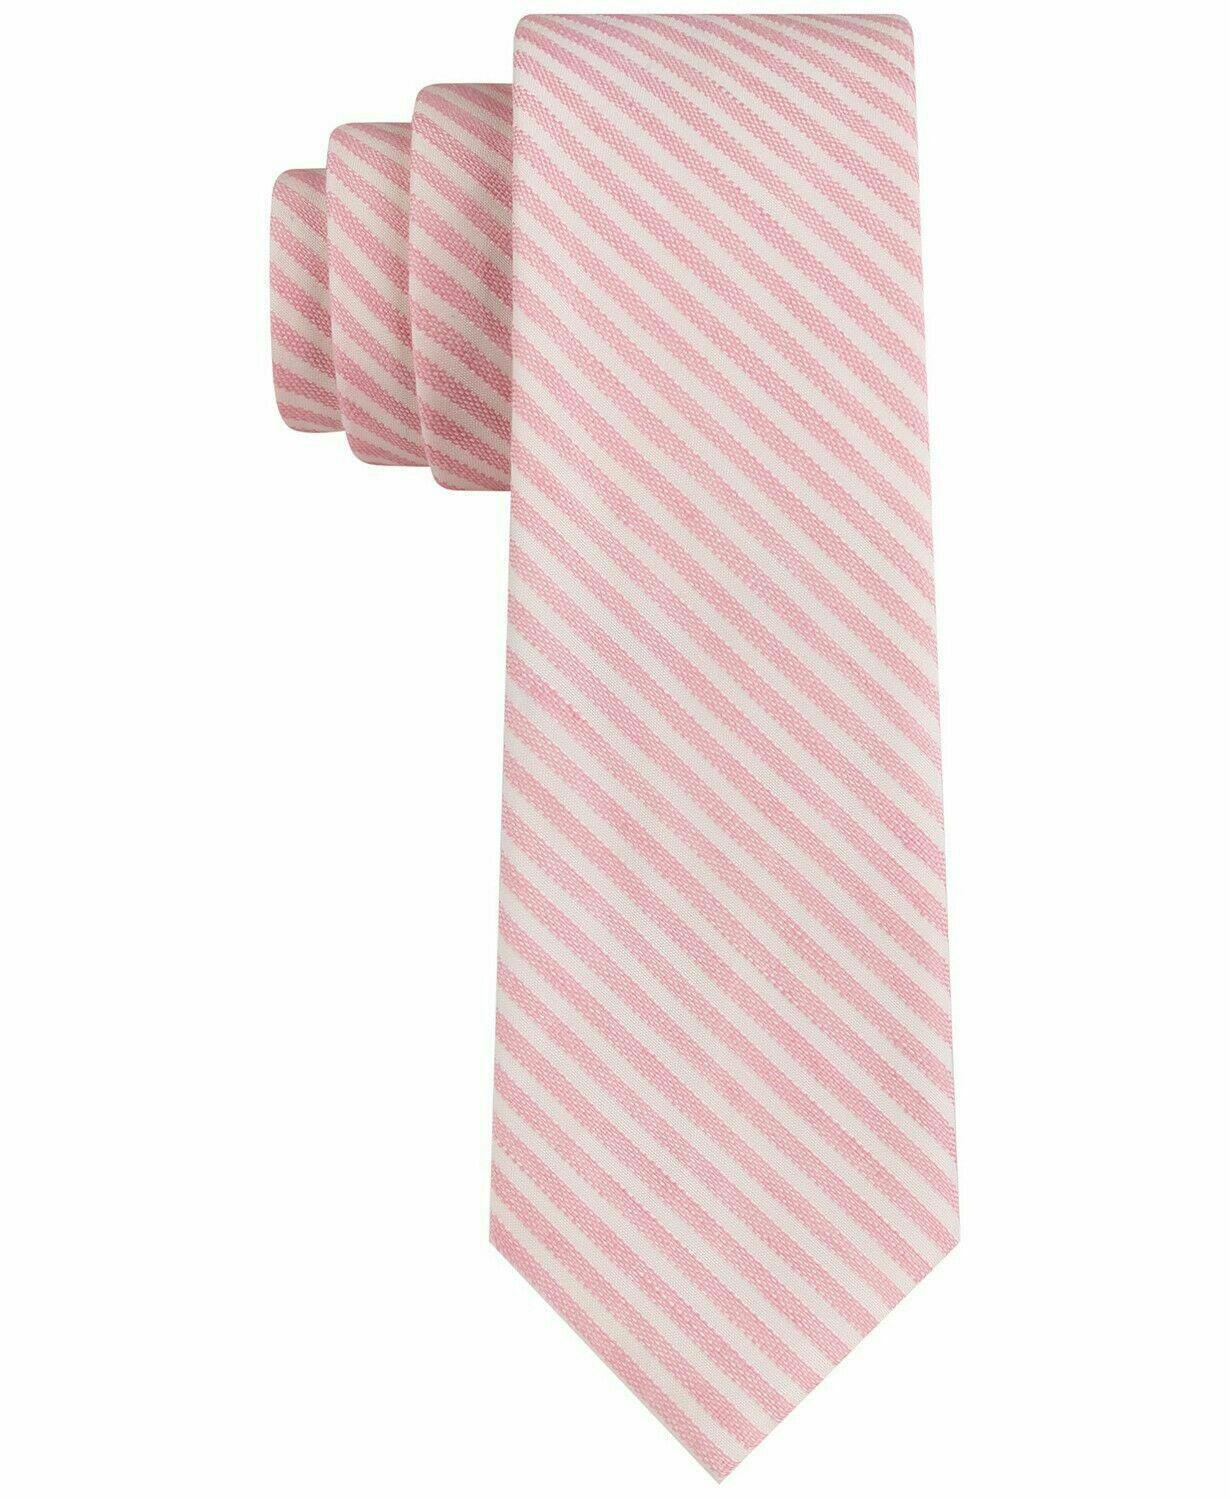 Color: Pinks Size: One Size Pattern: Striped Type: Tie Width: Skinny (Material: Polyester